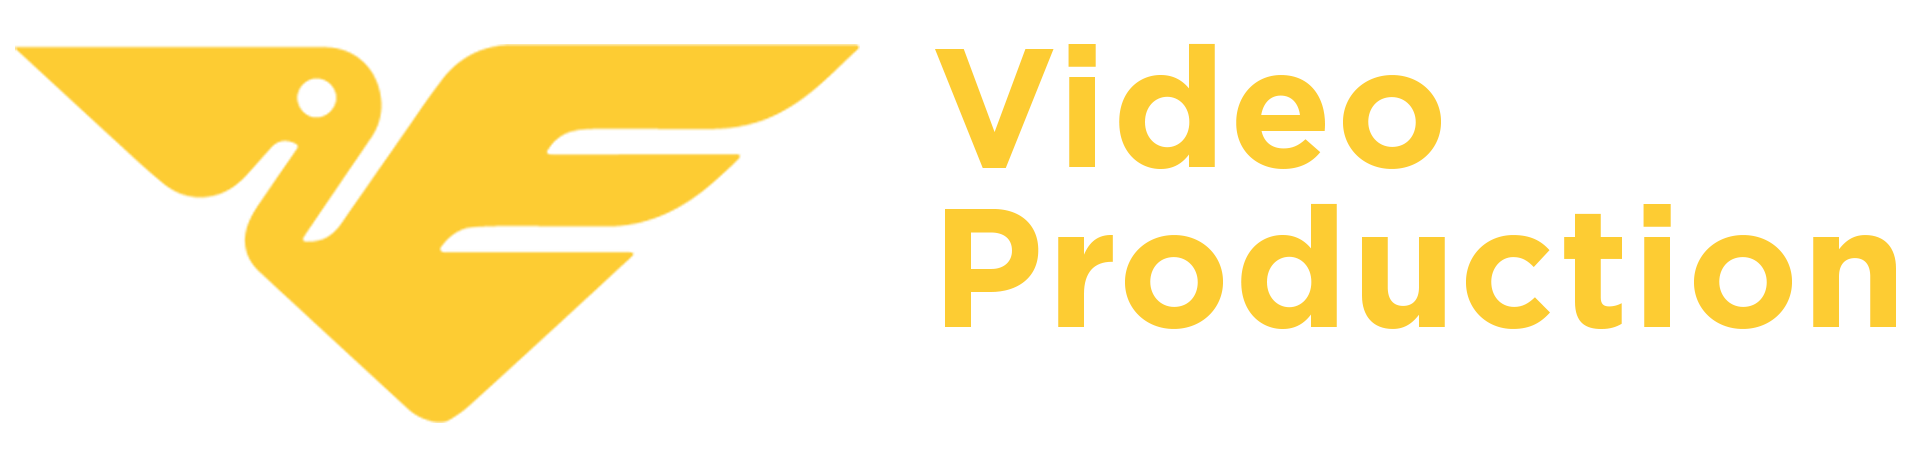 Video Production by The Dock Line Company (full size logo)